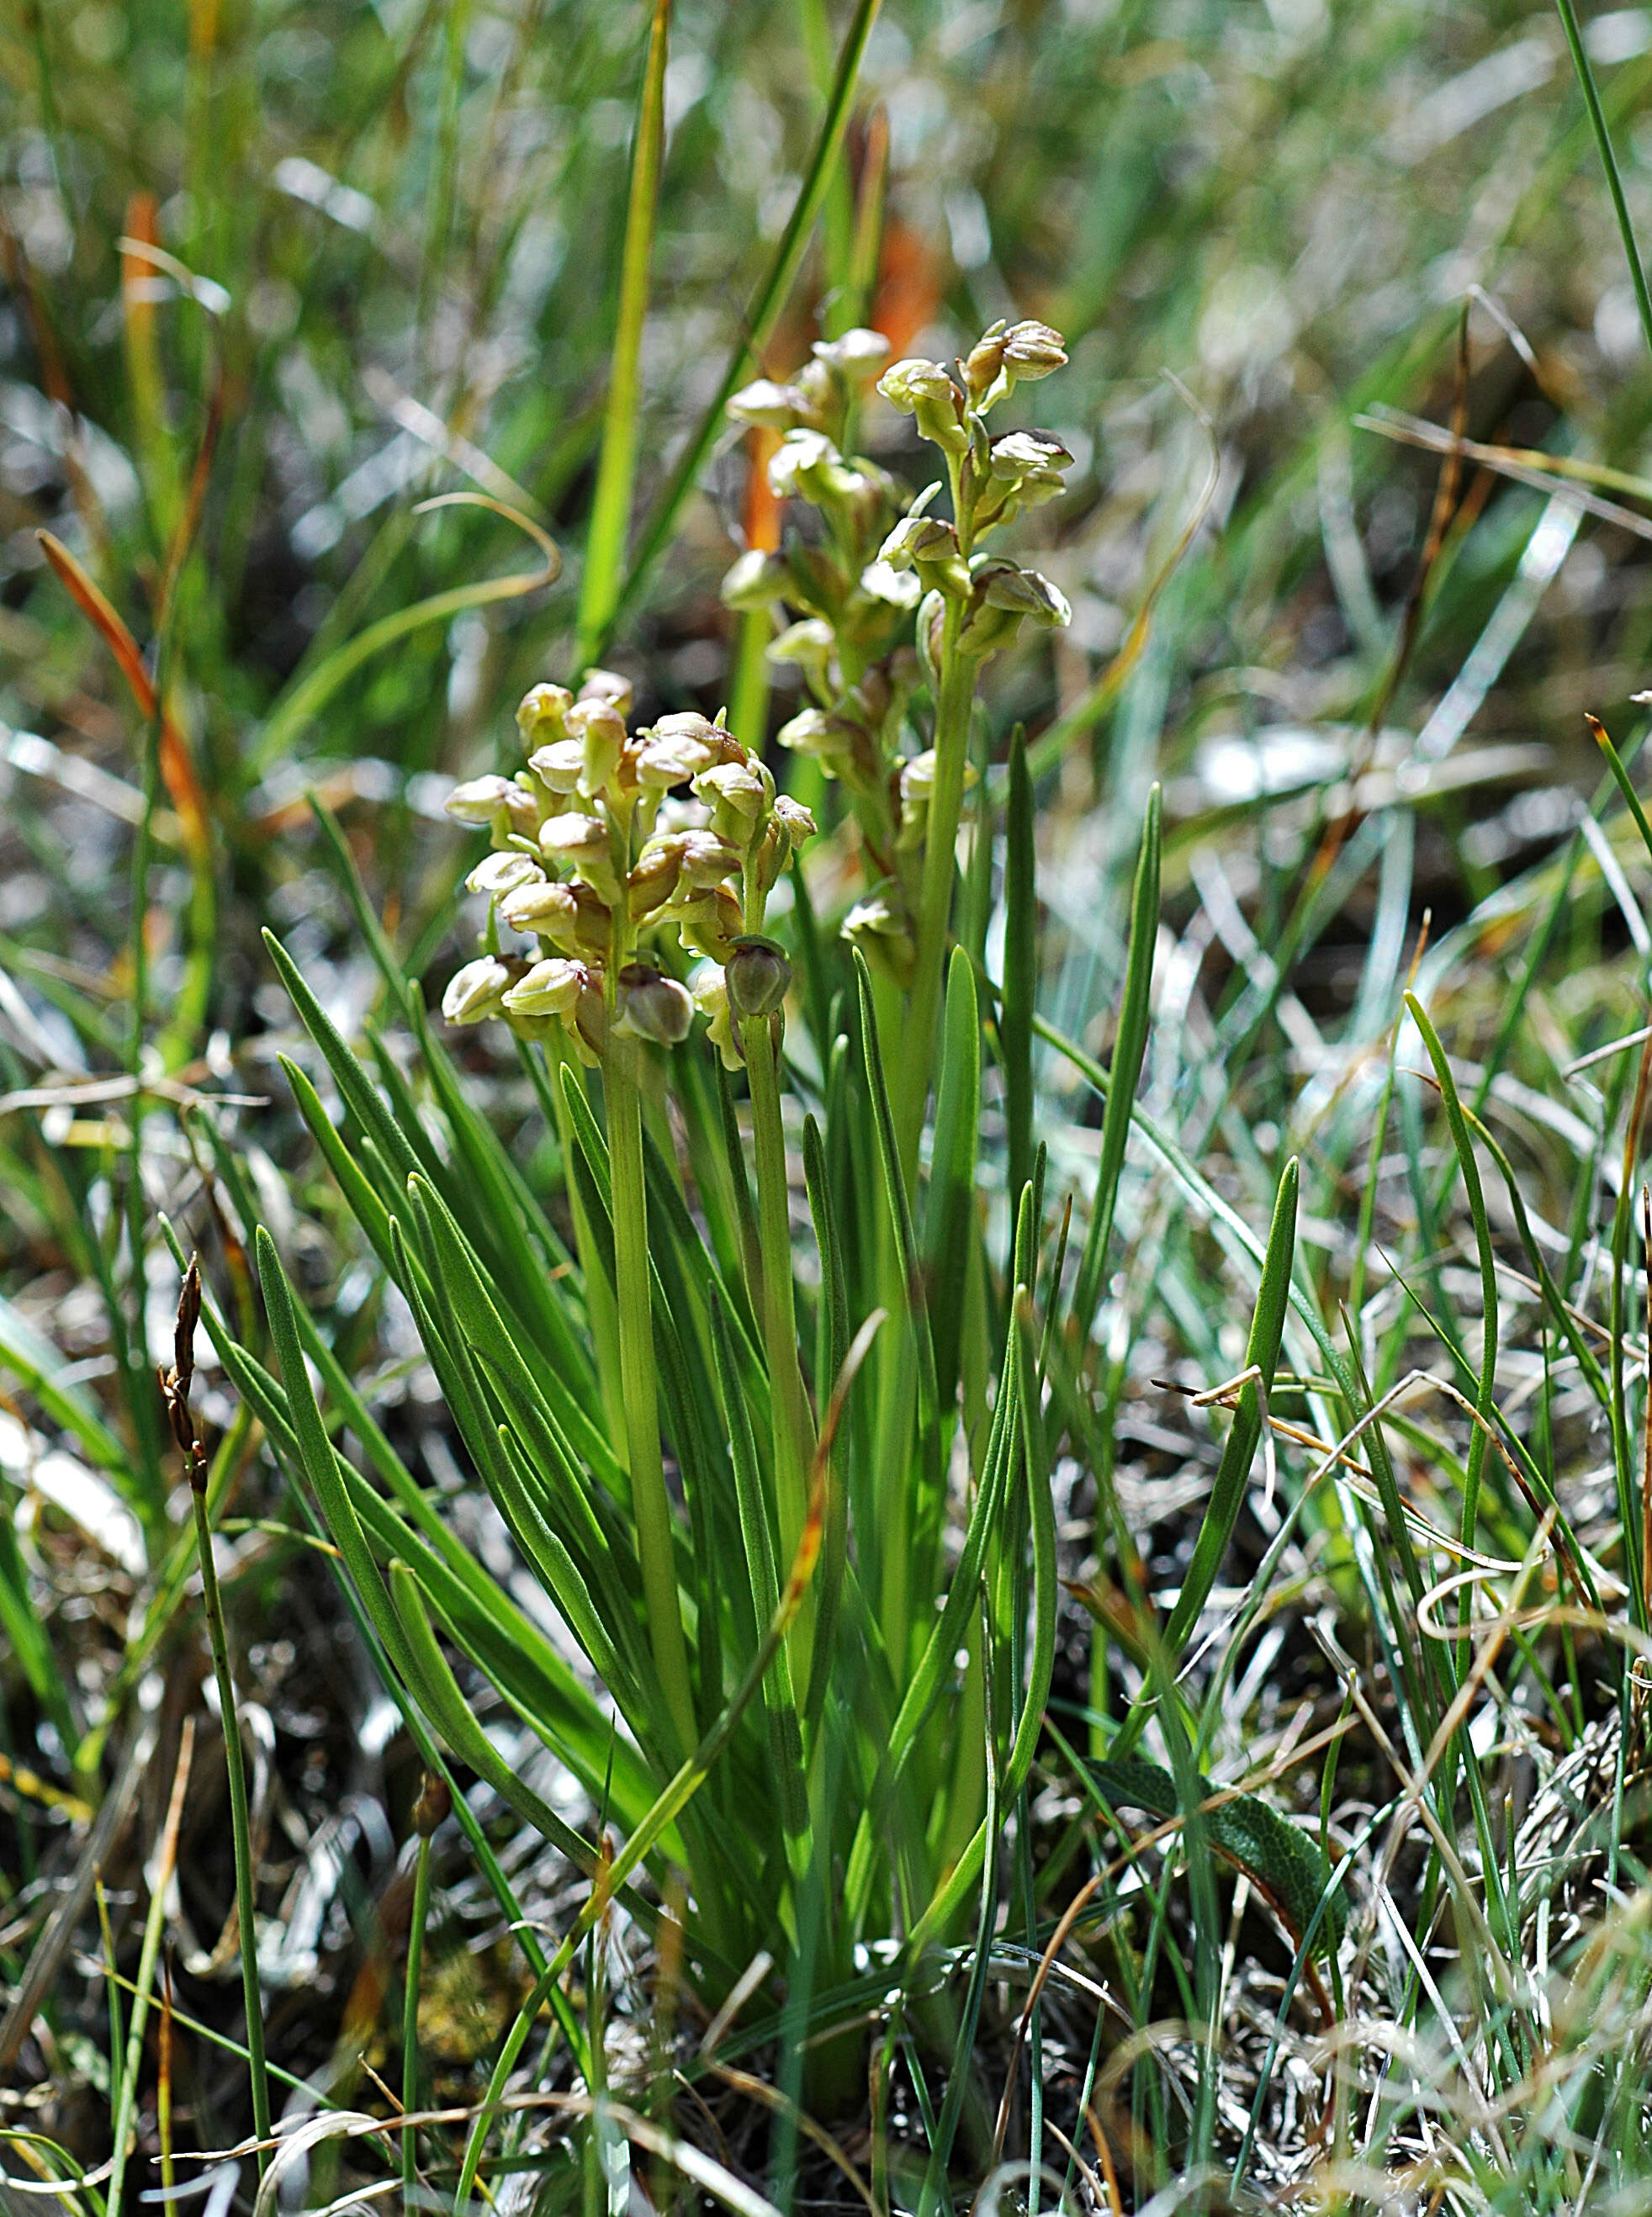 Image of Chamorchis